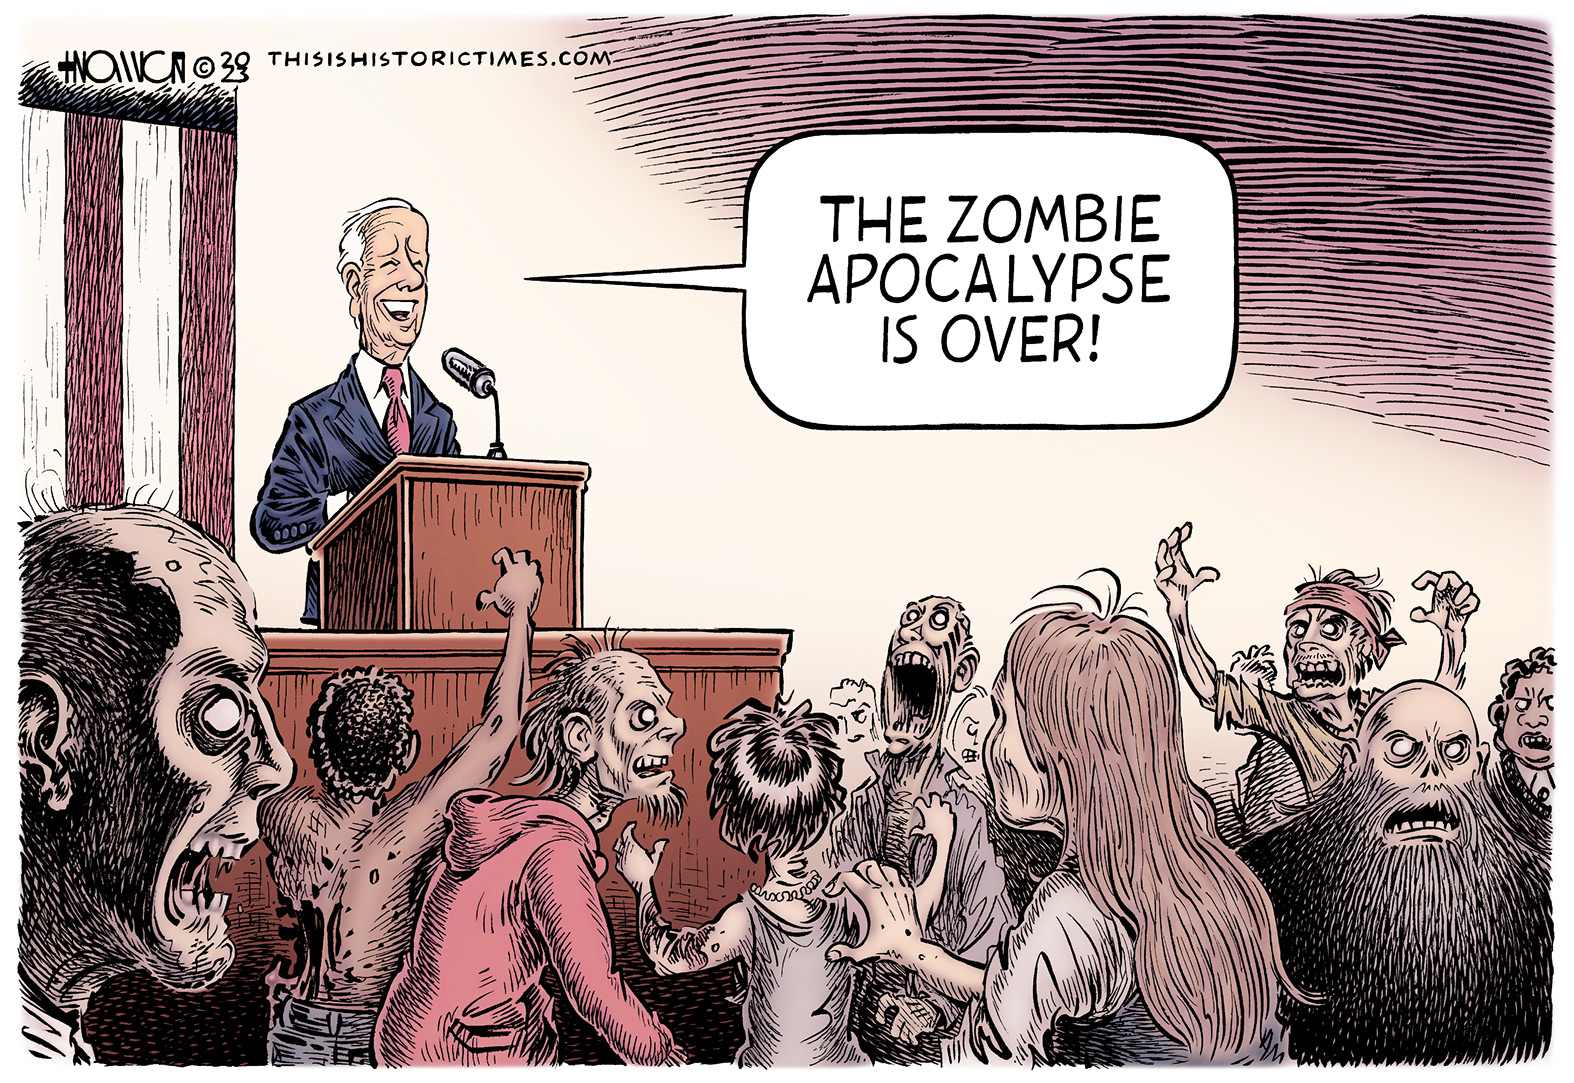 While surrounded by zombies which represent the COVID-19 pandemic, Joe Biden announces the zombie apocalypse is over.